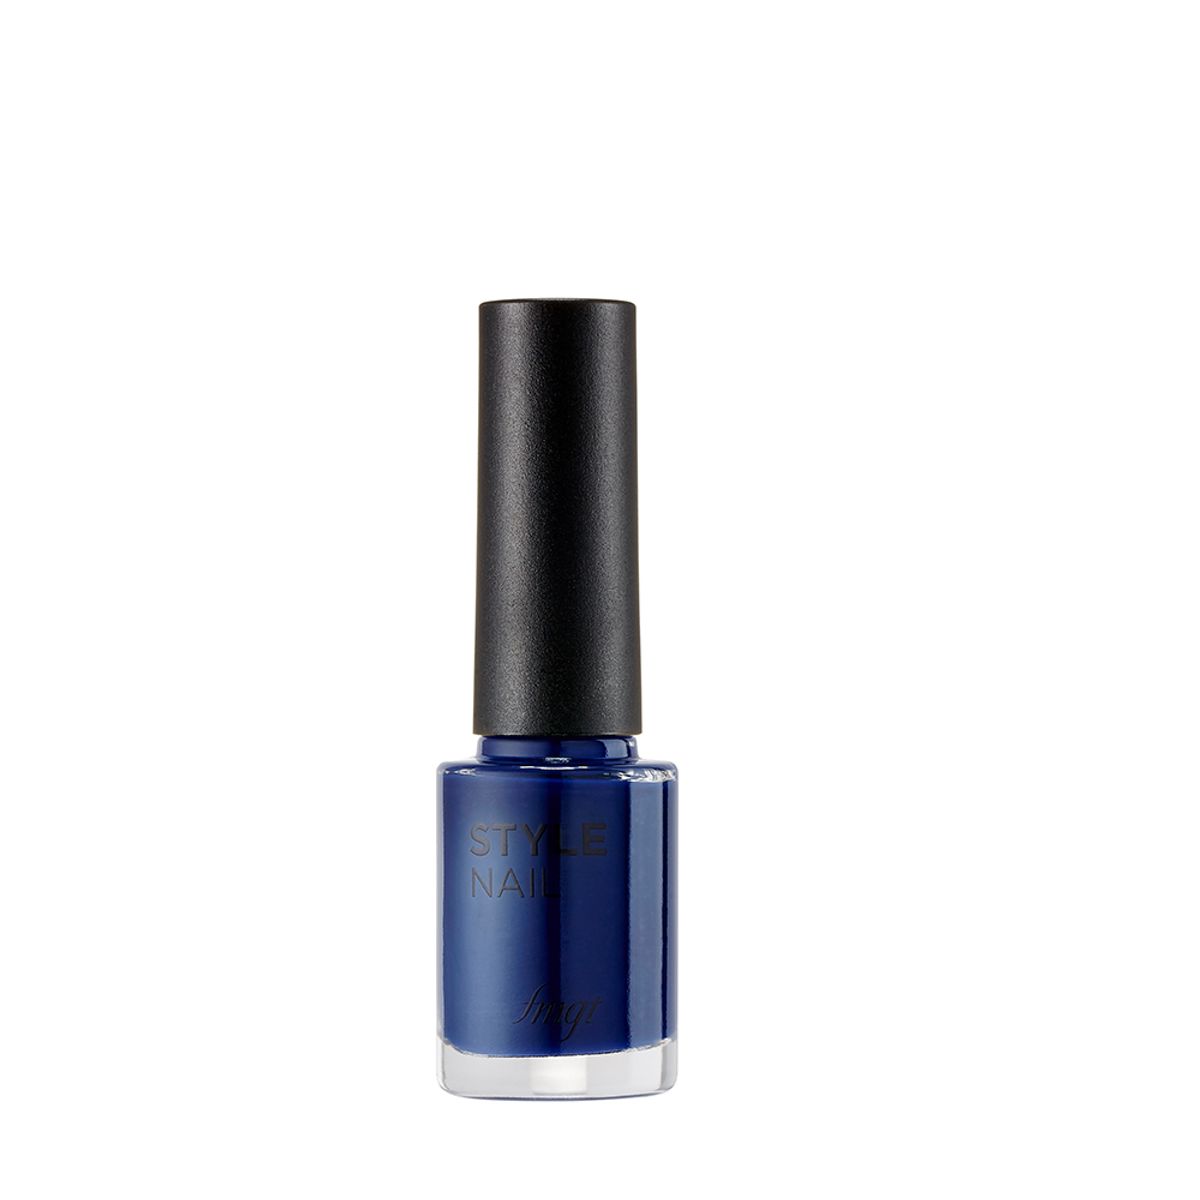 fmgt-son-mong-tay-thefaceshop-style-nail-7ml-21